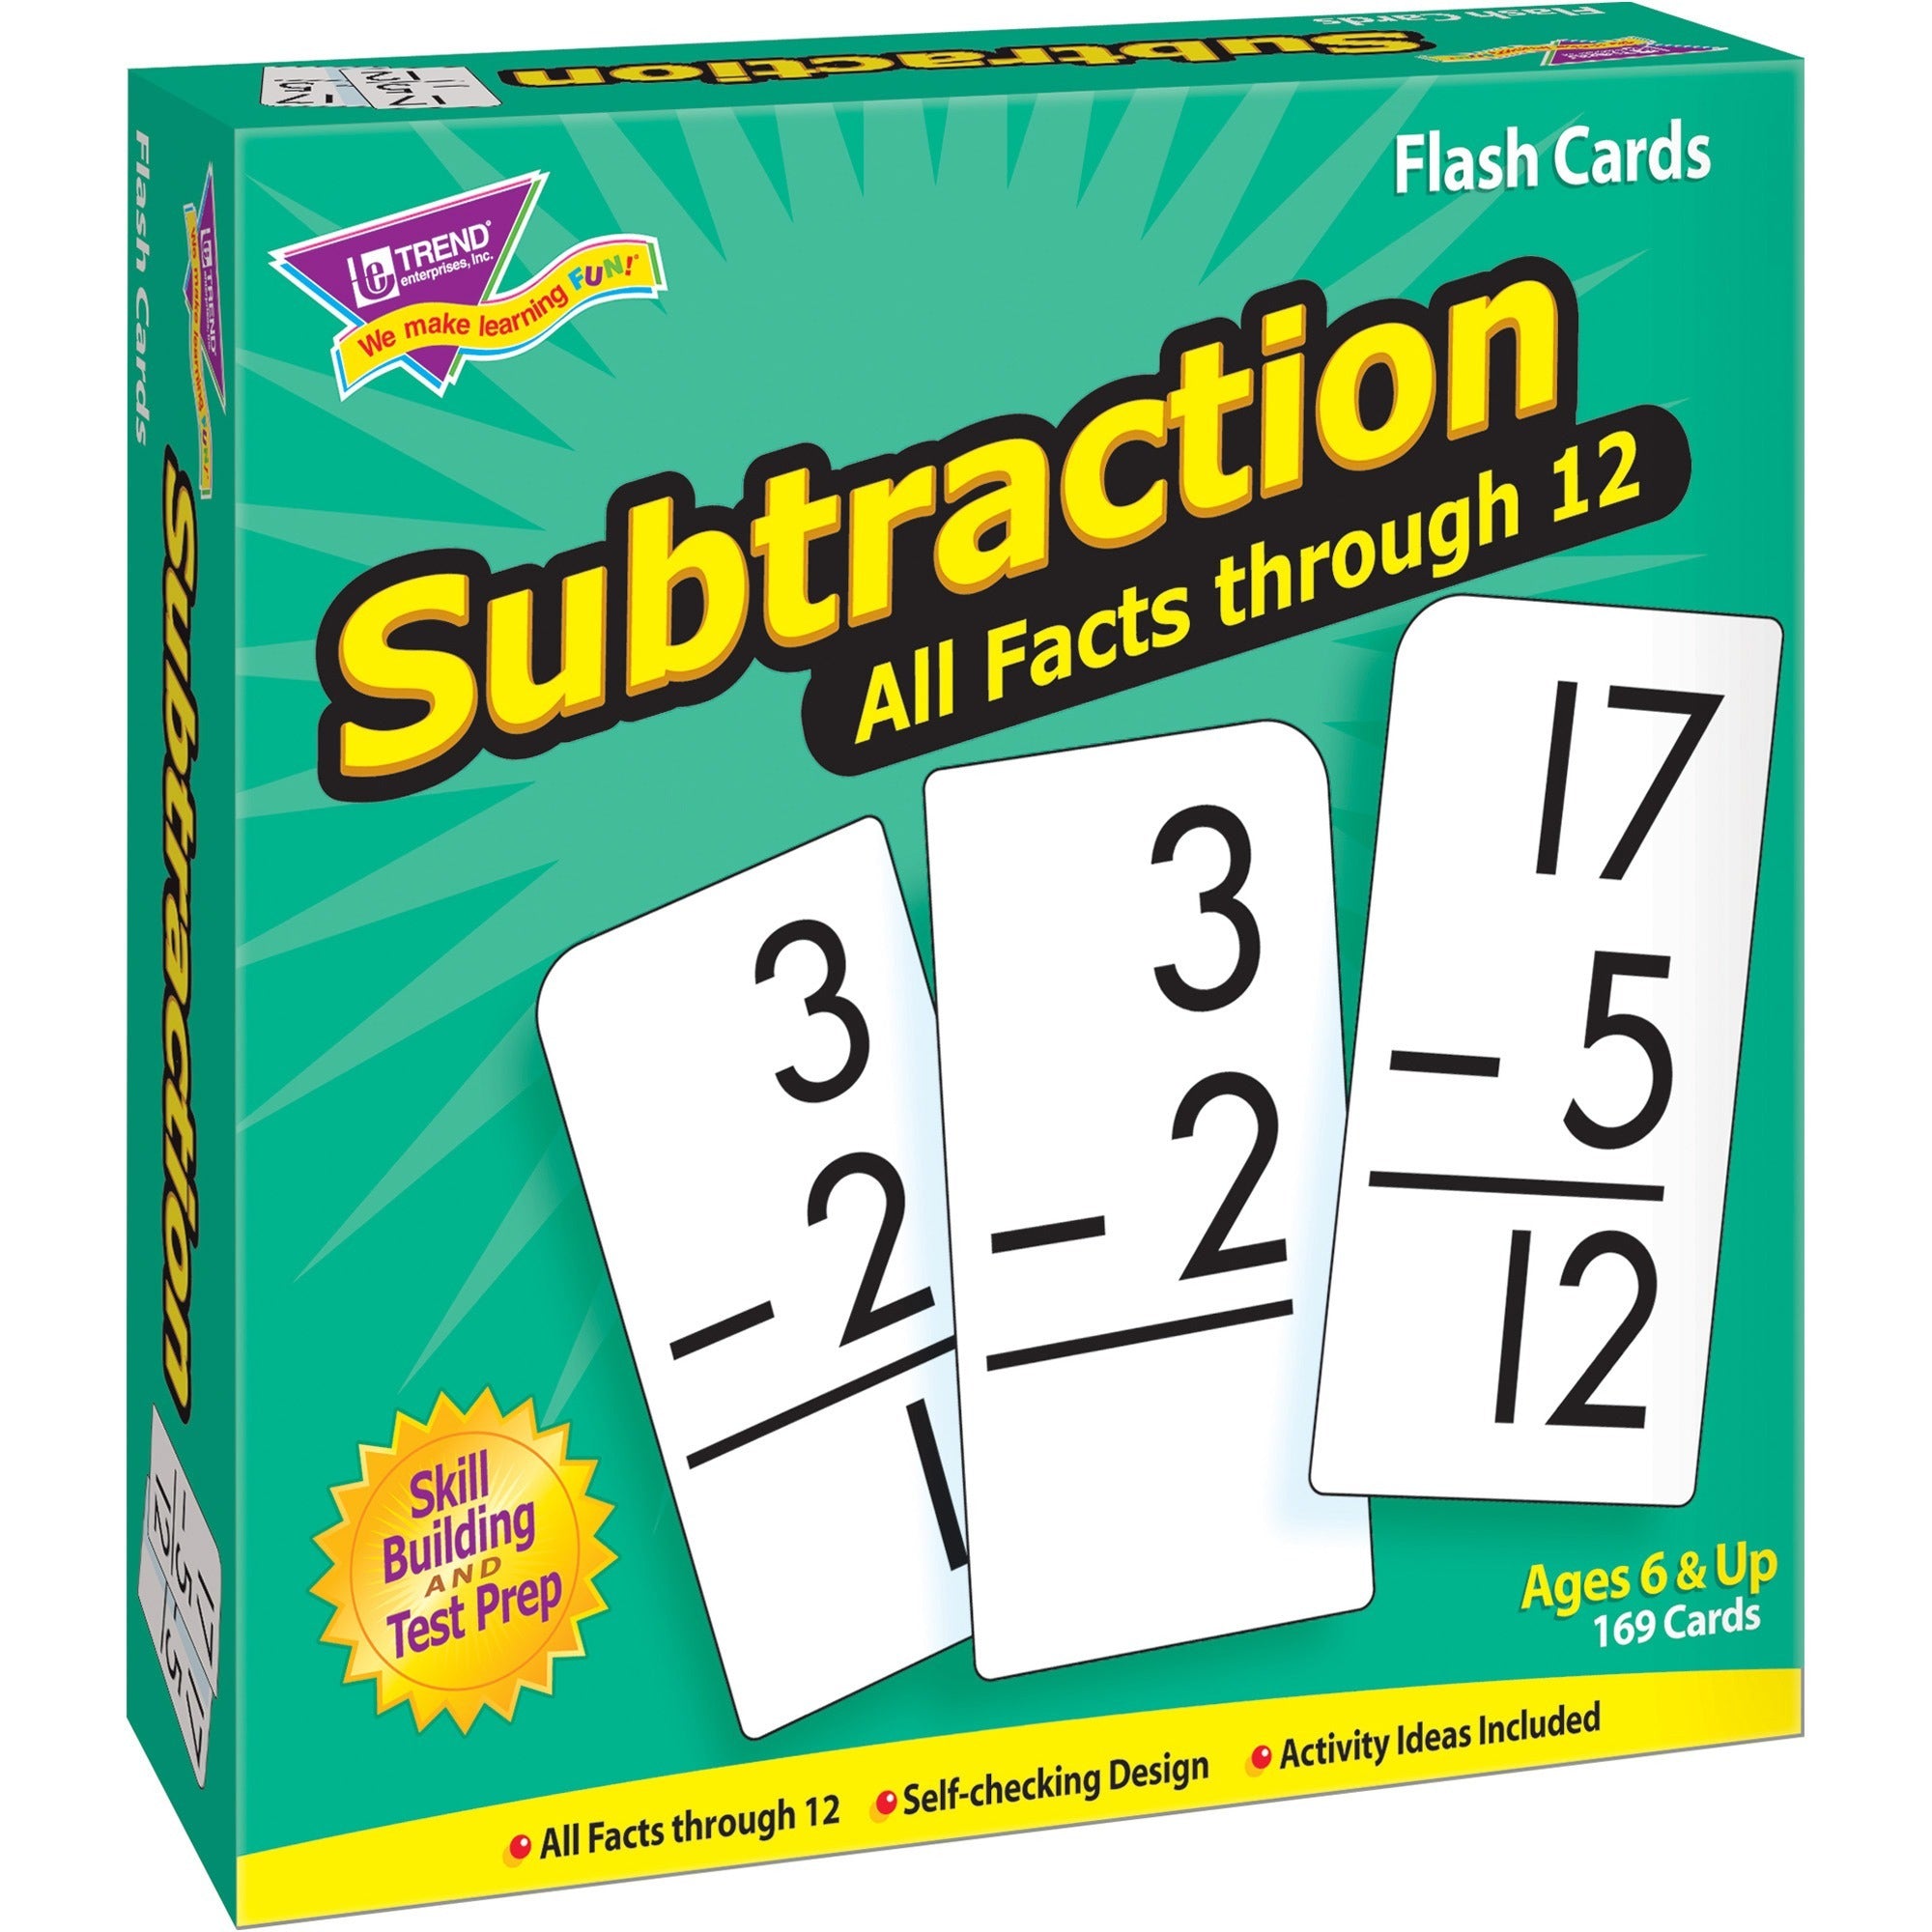 trend-subtraction-all-facts-through-12-flash-cards-theme-subject-learning-skill-learning-subtraction-169-pieces-6+-169-box_tep53202 - 1